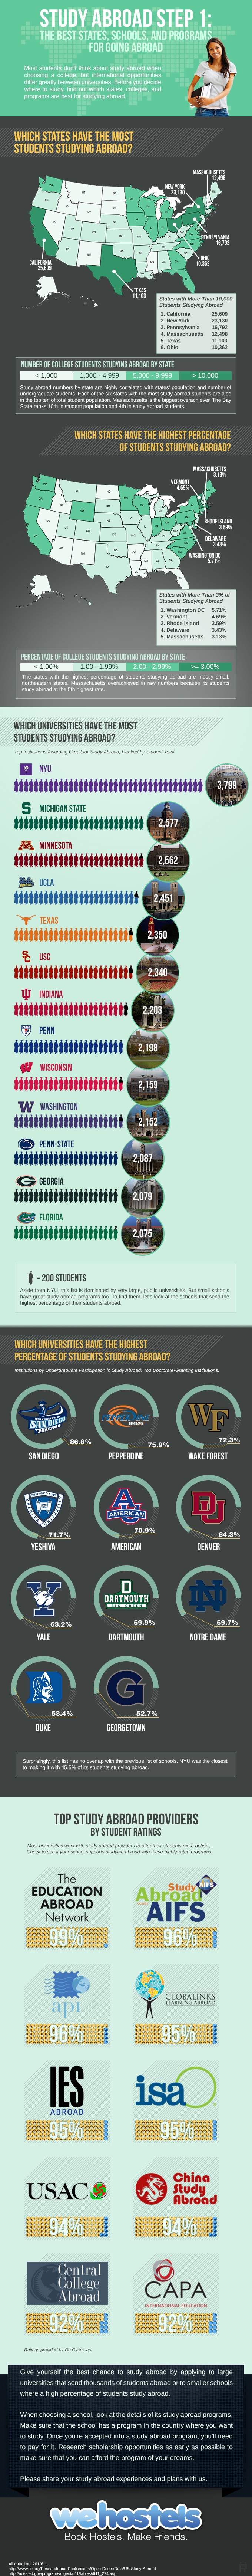 Studying Abroad: Where Students Go and Why